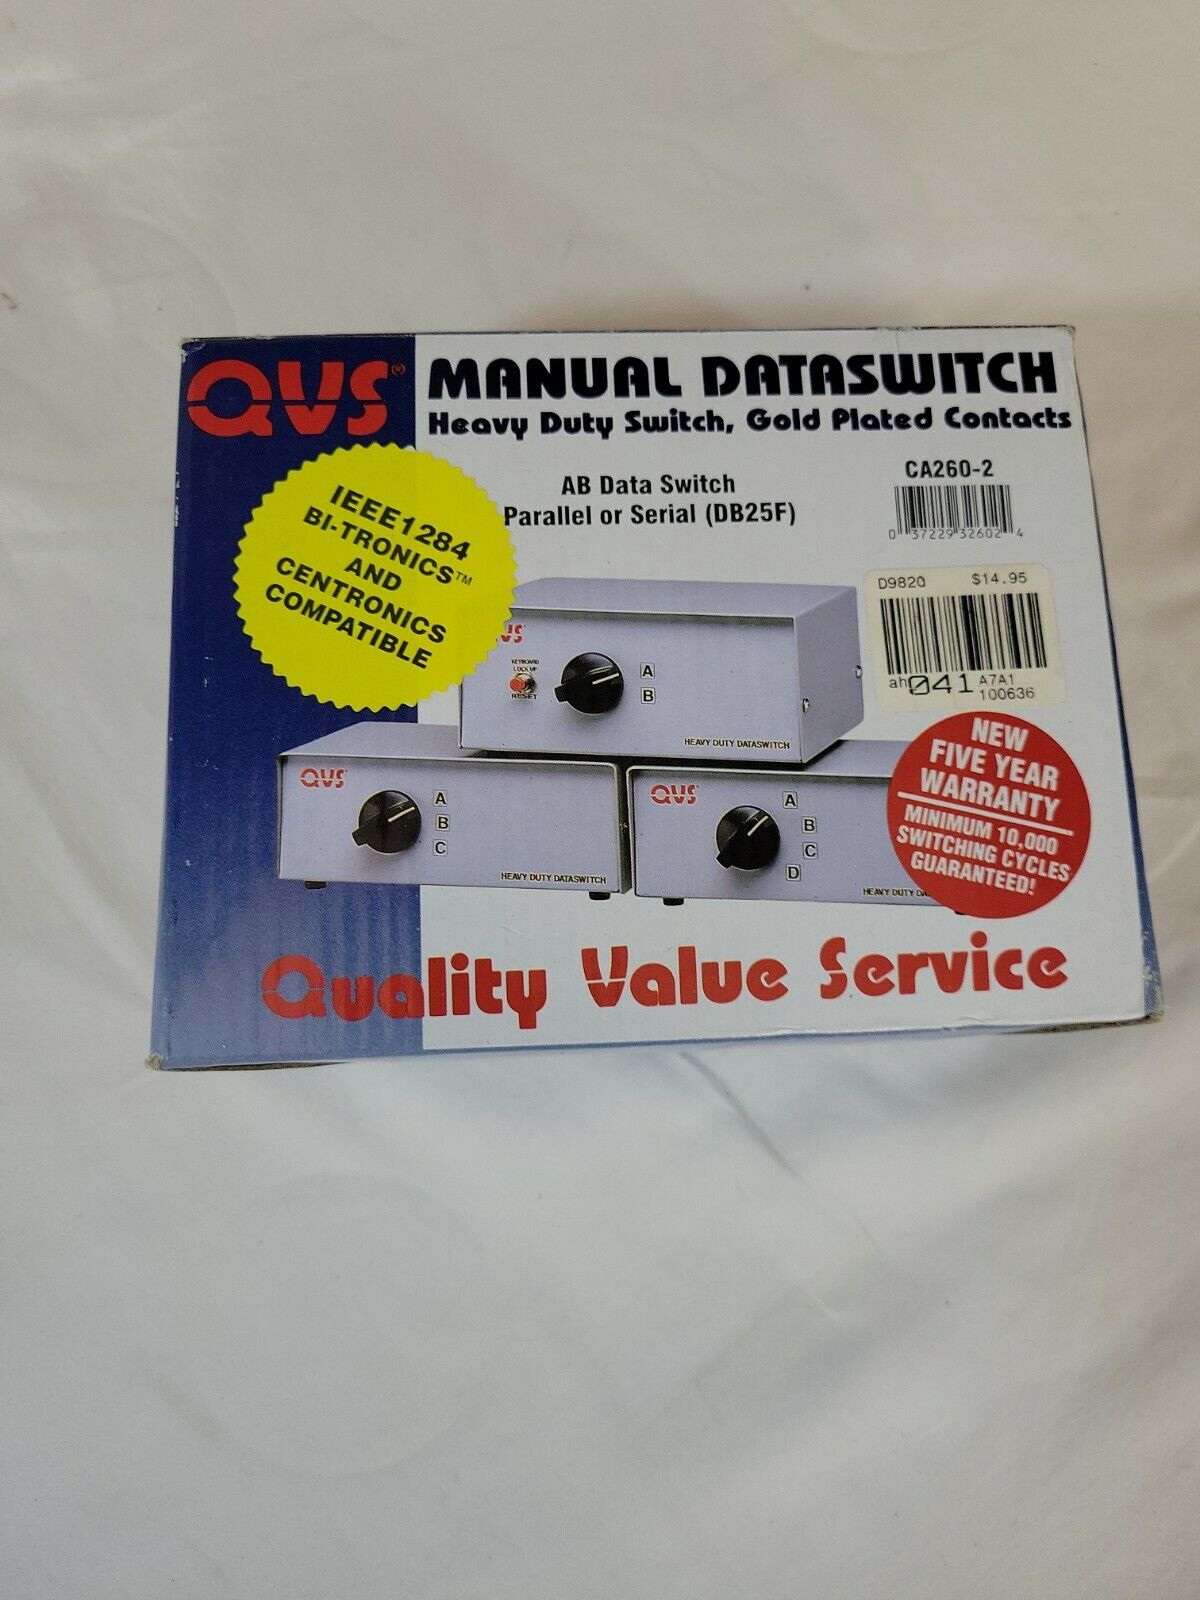 Data Transfer AB Switch Manual DB25F Connections *NEW*